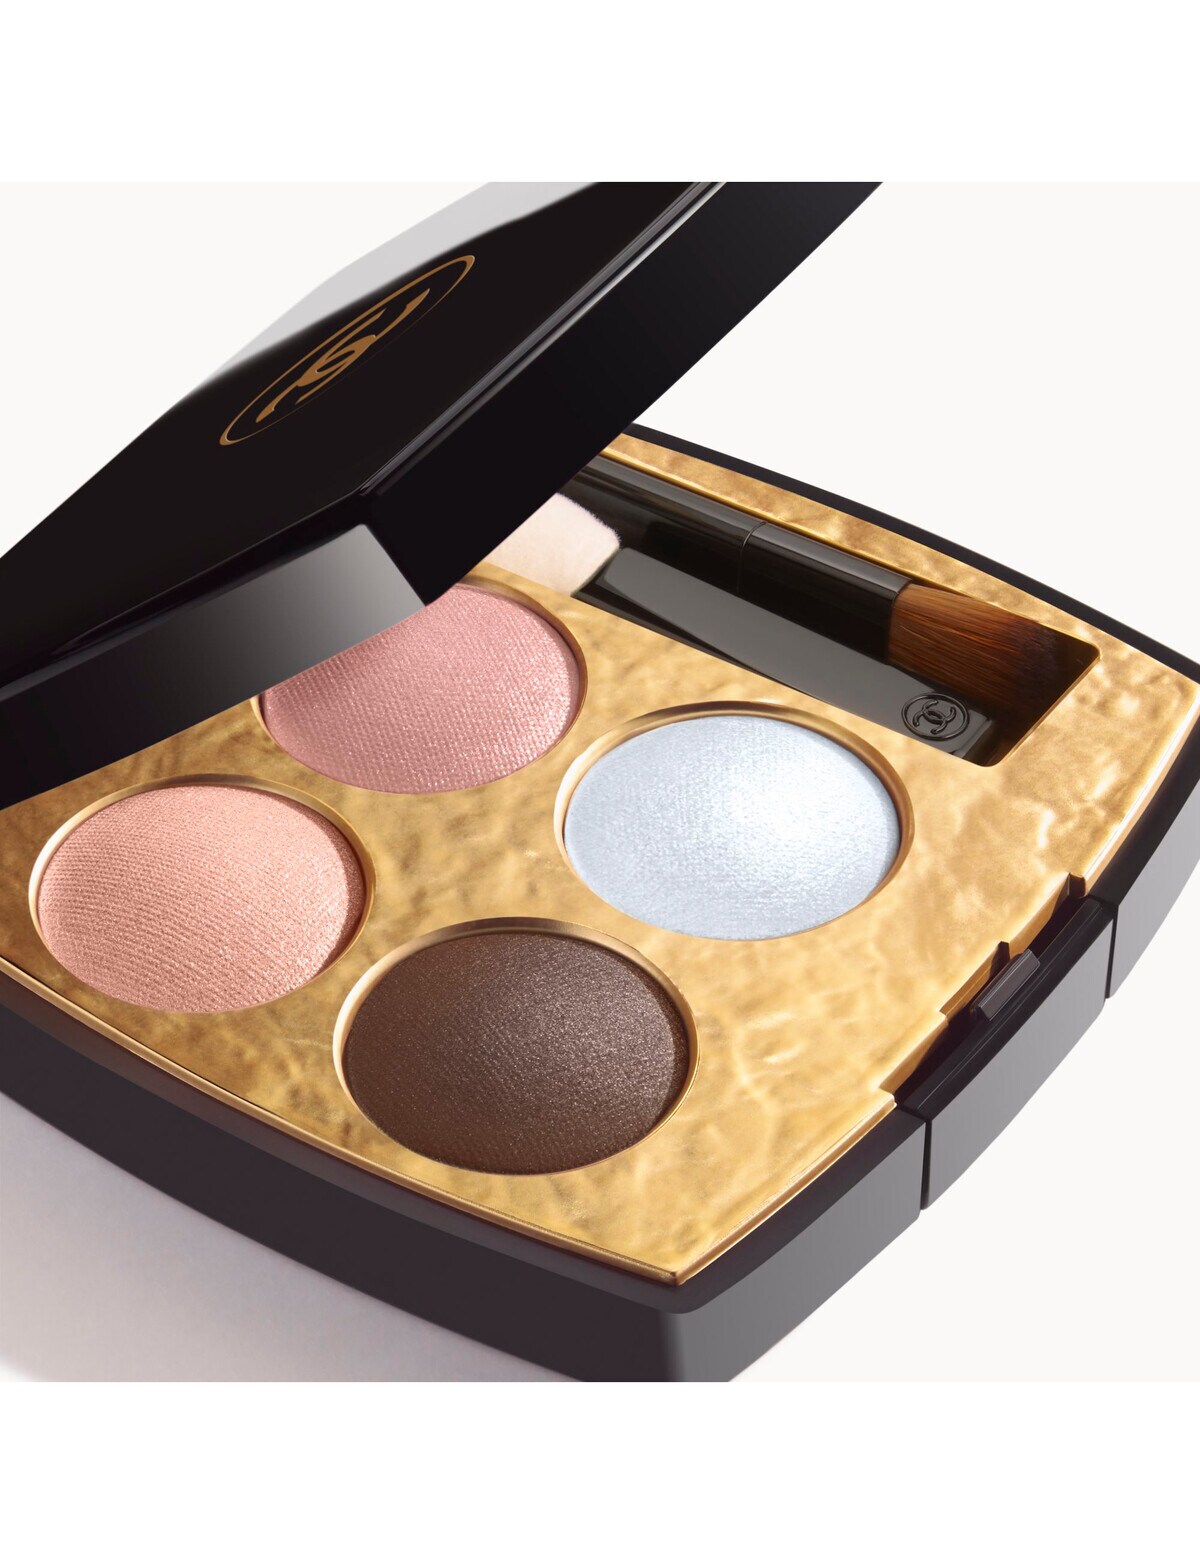 Chanel Les 4 Ombres Multi-effect Quadra Eyeshadow #228 STOCK, Facial  cosmetics & make-up, Official archives of Merkandi